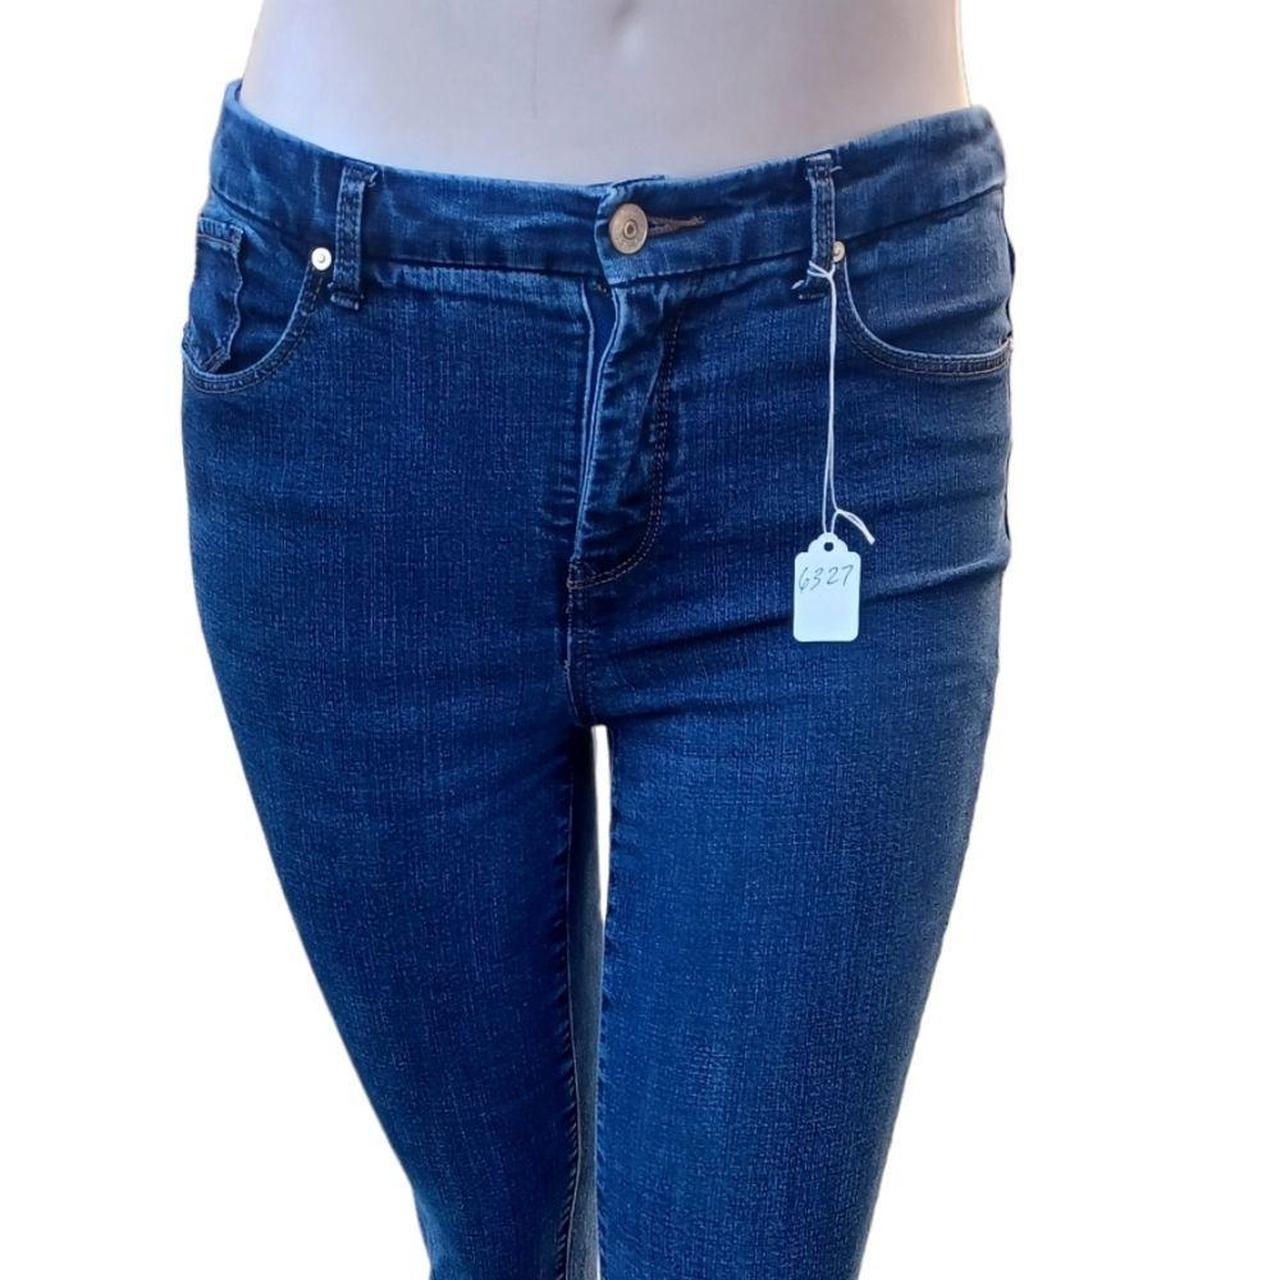 So Slimming Girlfriend Ankle Jeans - Chico's